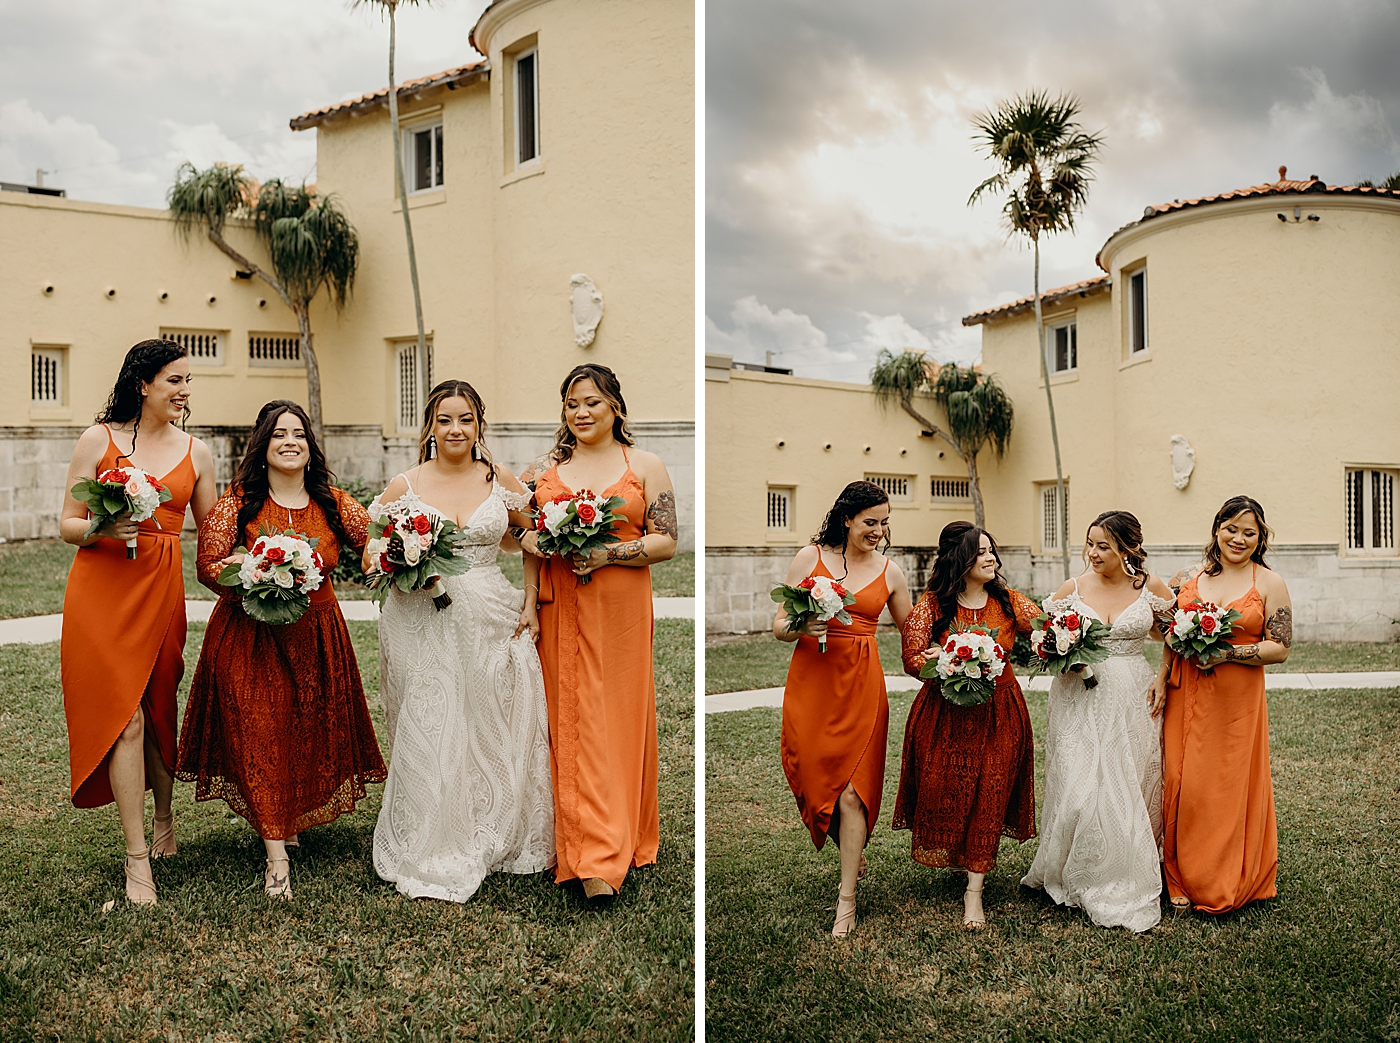 Bride and tangerine dressed bridesmaids walking together with white and red bouquets cloudy sky Benvenuto Restaurant Wedding Photography captured by South Florida Wedding Photographer Maggie Alvarez Photography